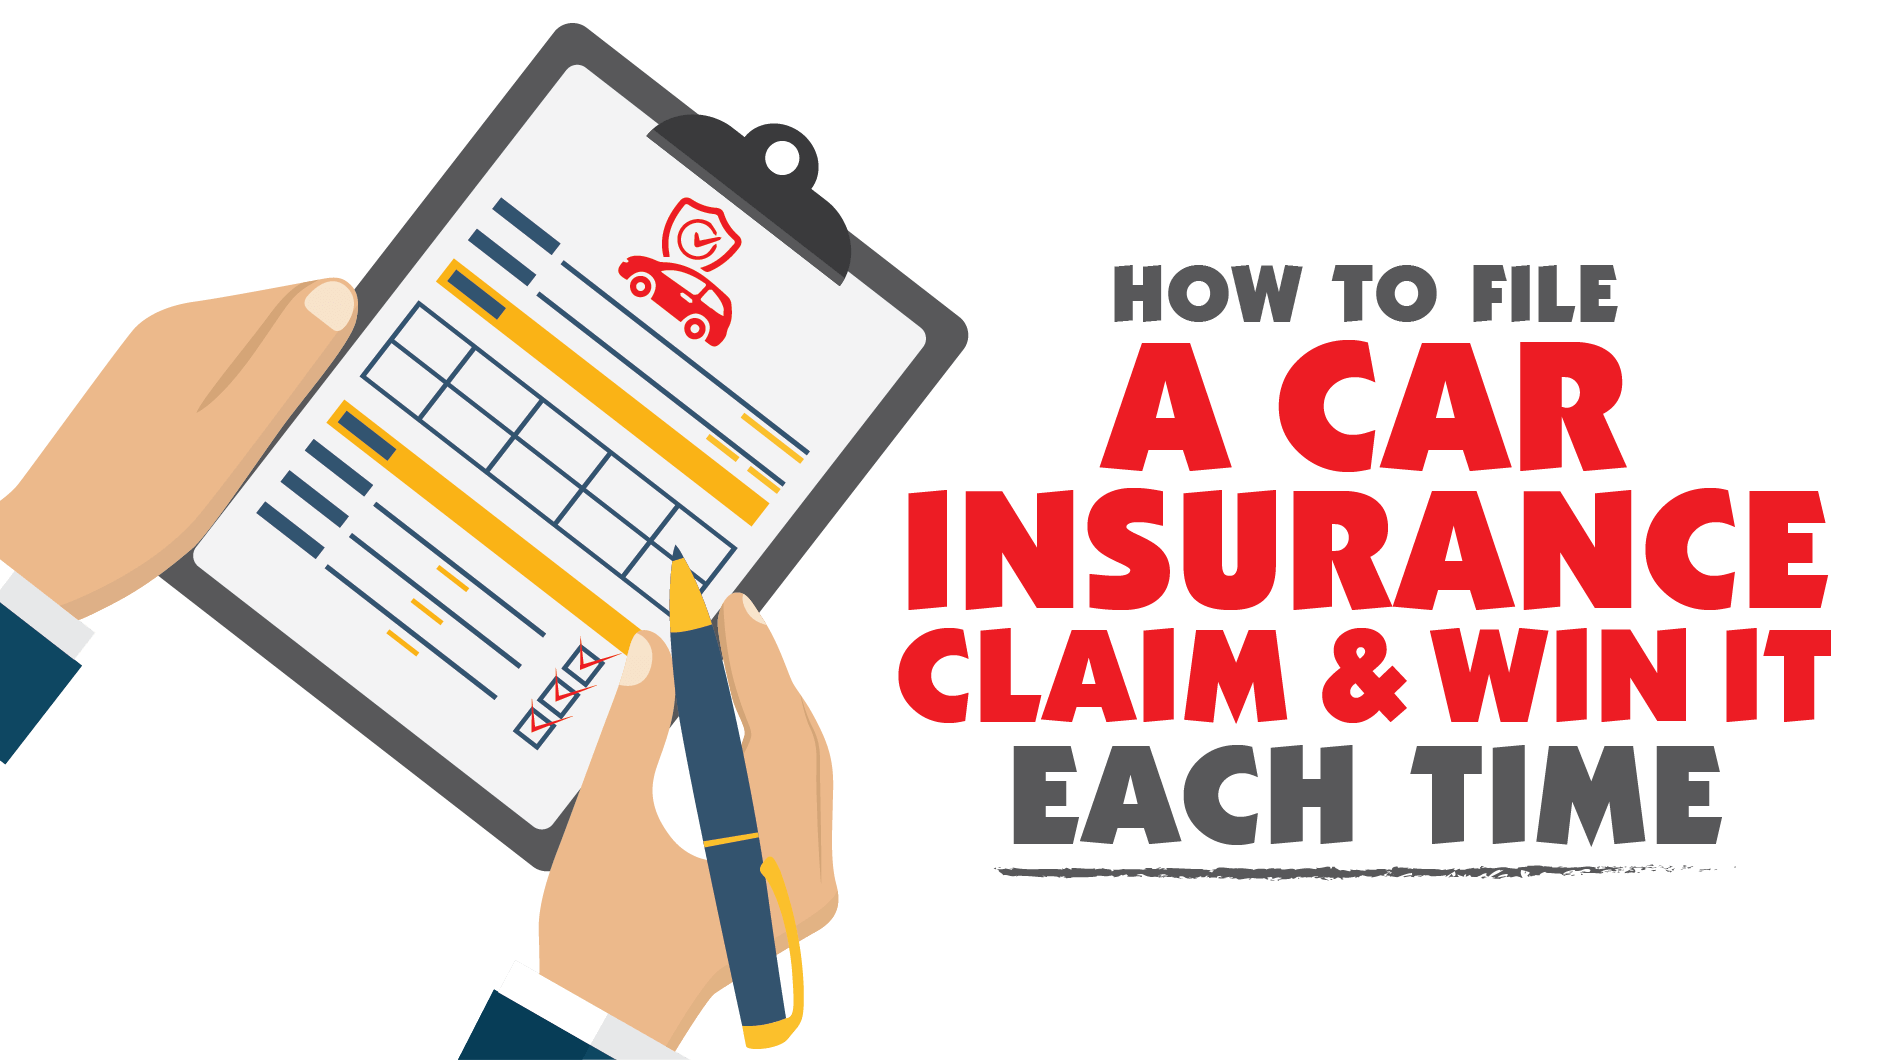 How to File an Auto Insurance Claim & Win It Each Time